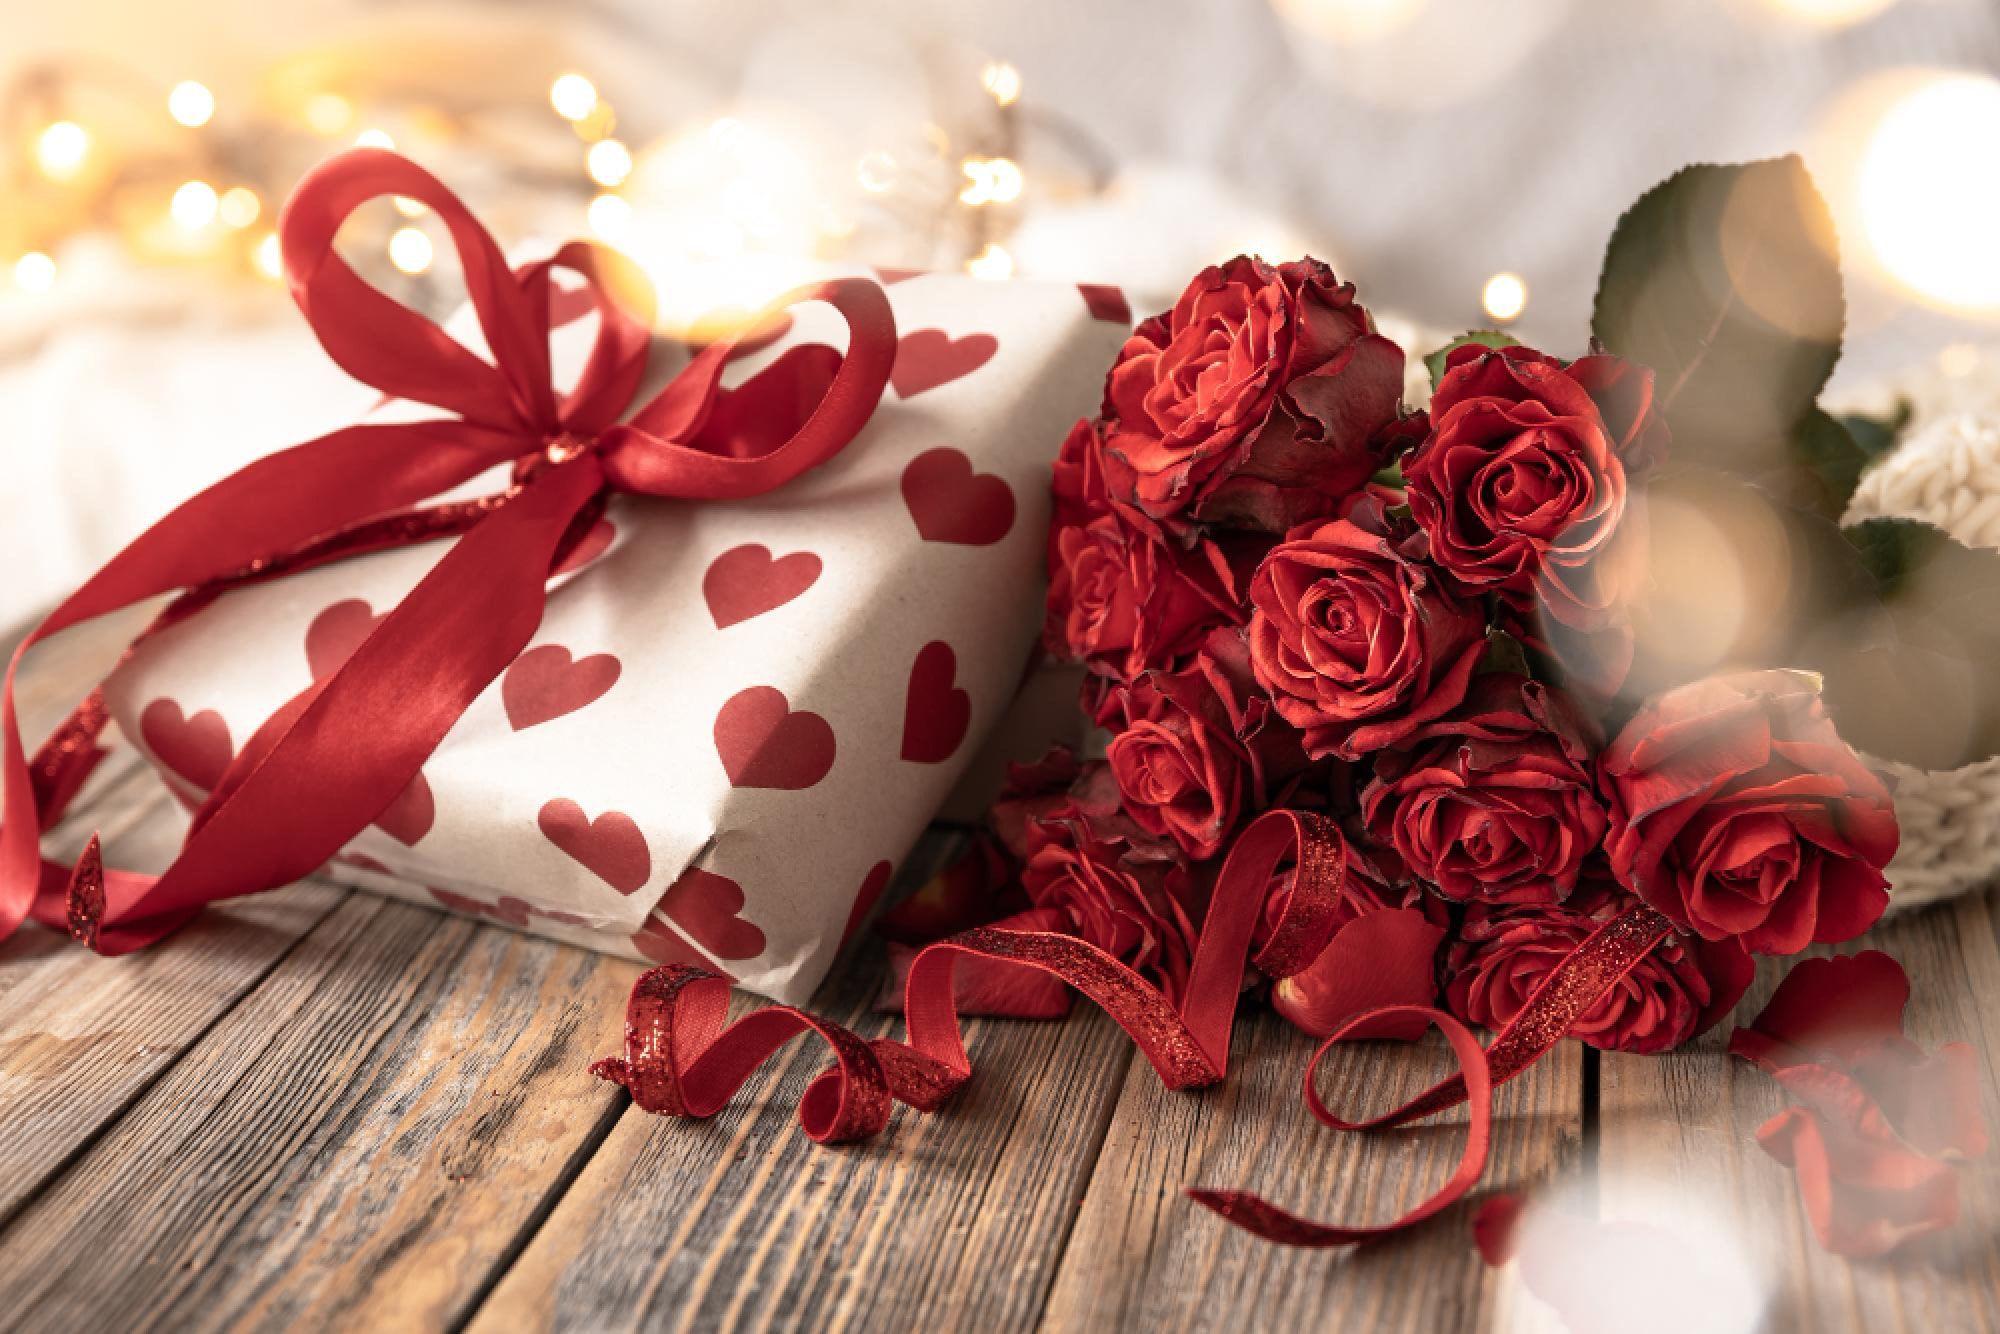 Valentine's Day Gift Guide and Tips: Create a Memorable Day